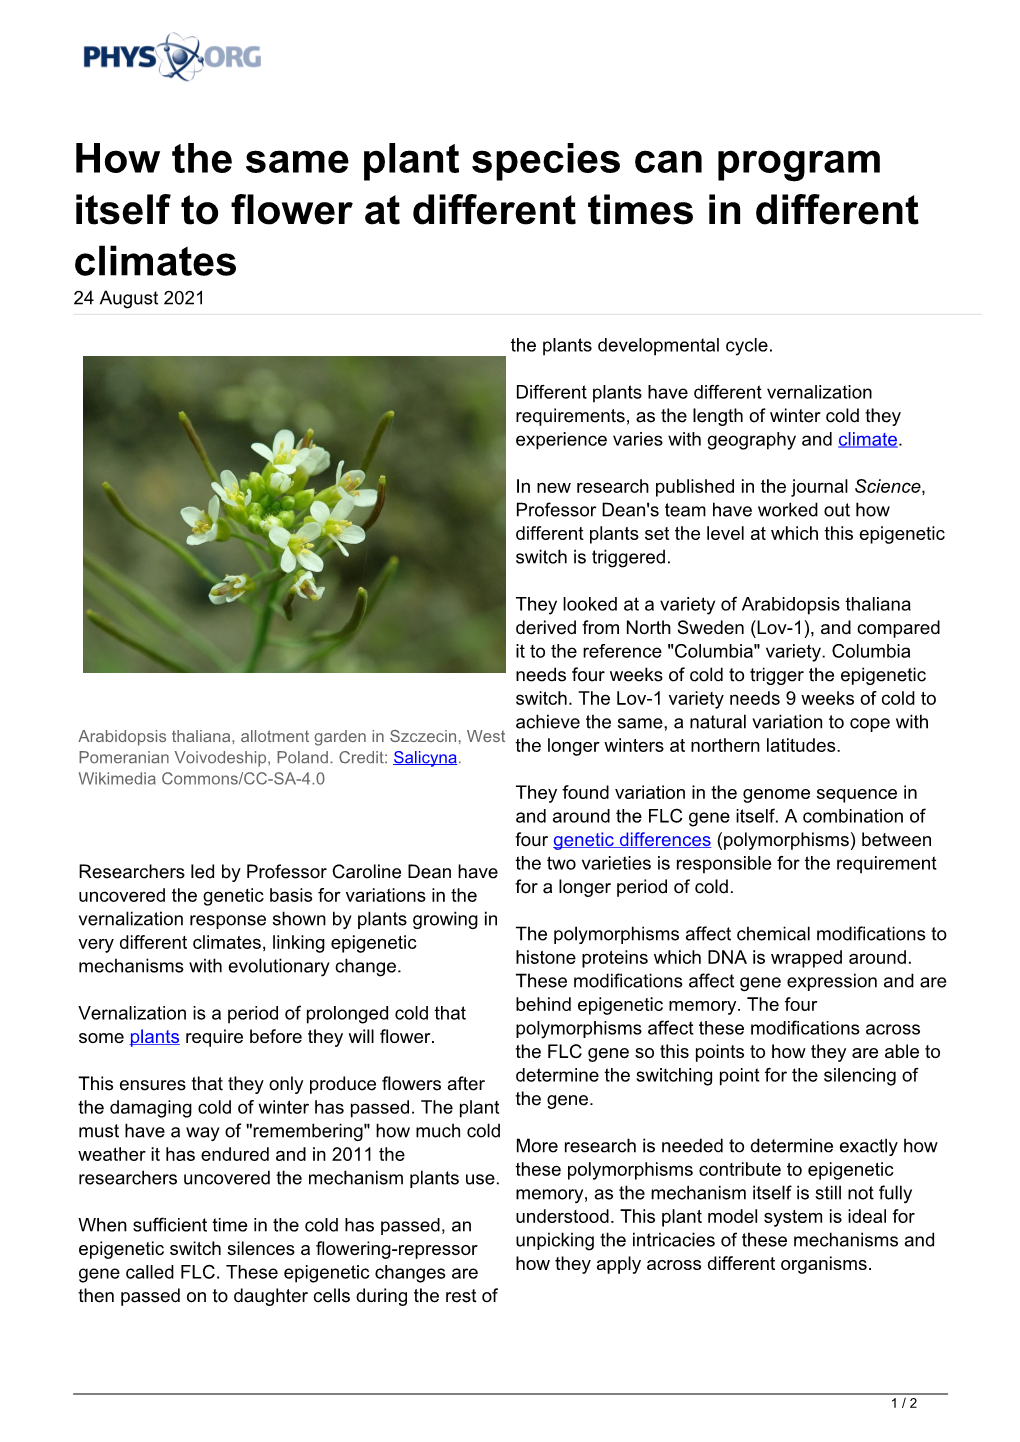 How the Same Plant Species Can Program Itself to Flower at Different Times in Different Climates 24 August 2021